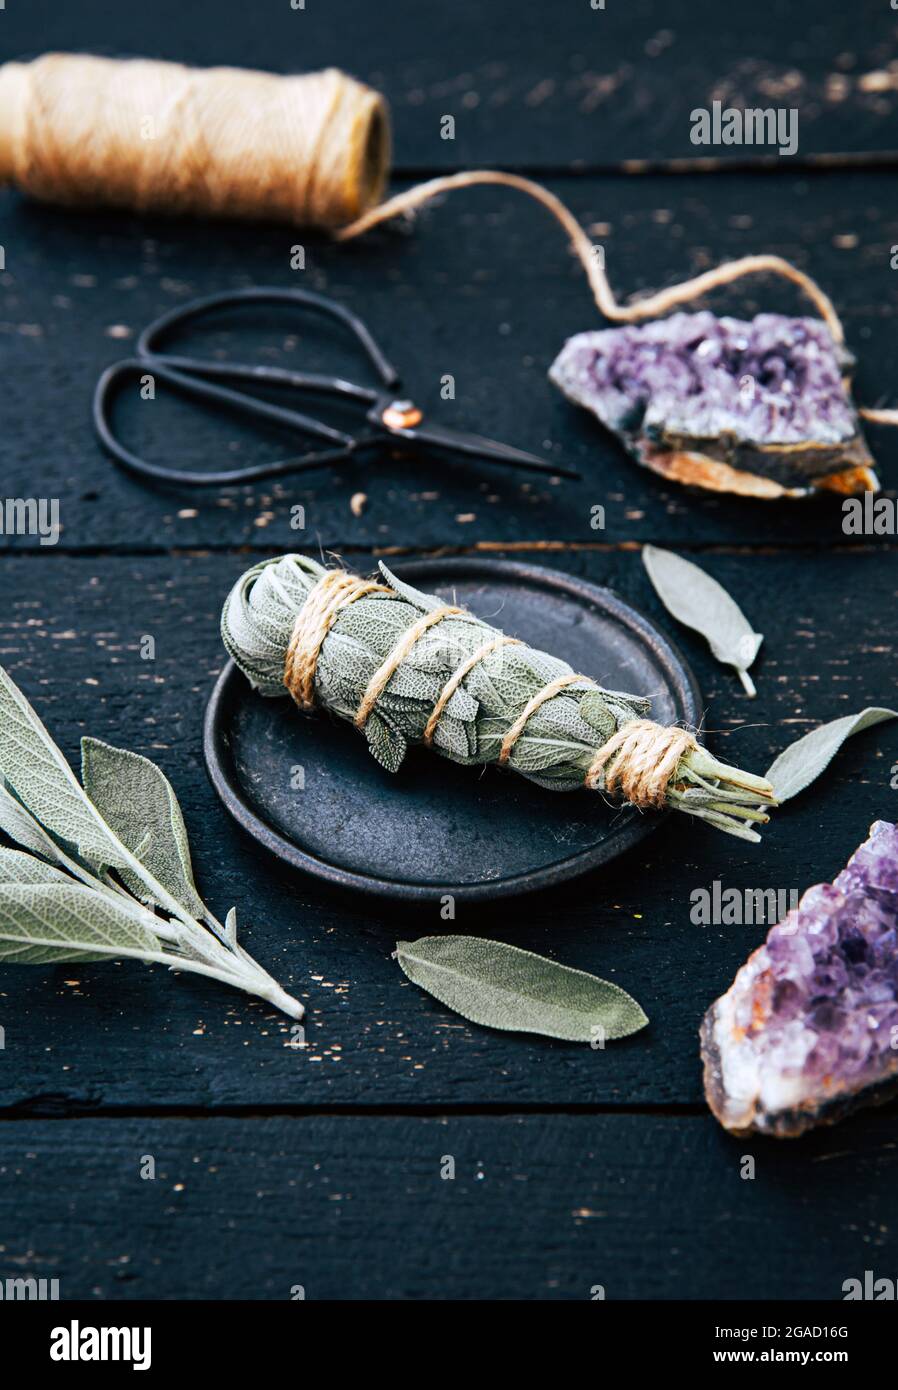 White homemade sage Salvia apiana smudge stick at home with homegrown sage leaves. Cotton string, vintage scissors and amethyst clusters. Stock Photo